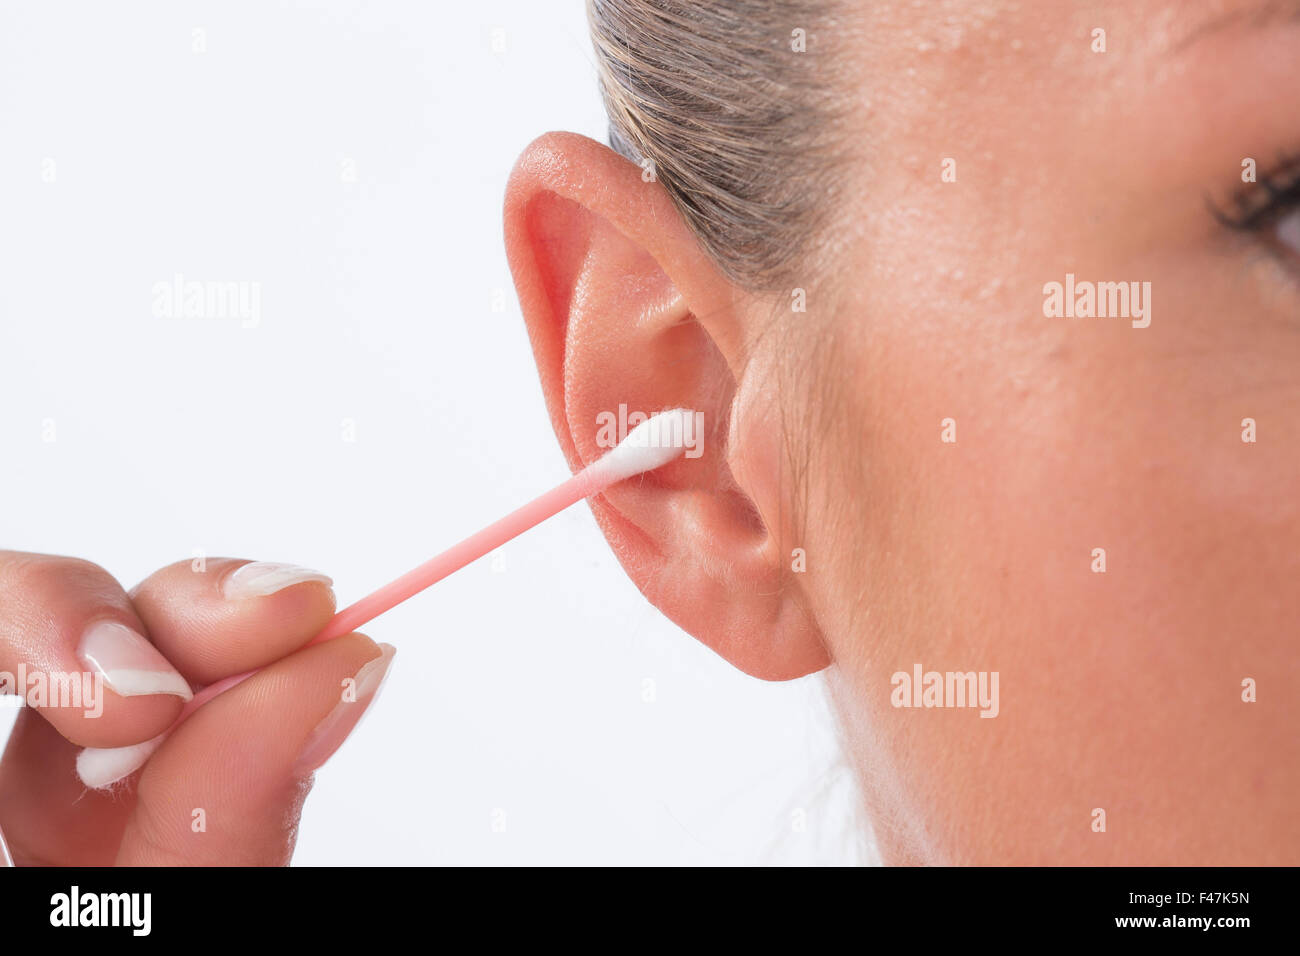 WOMAN CLEANING EAR Stock Photo